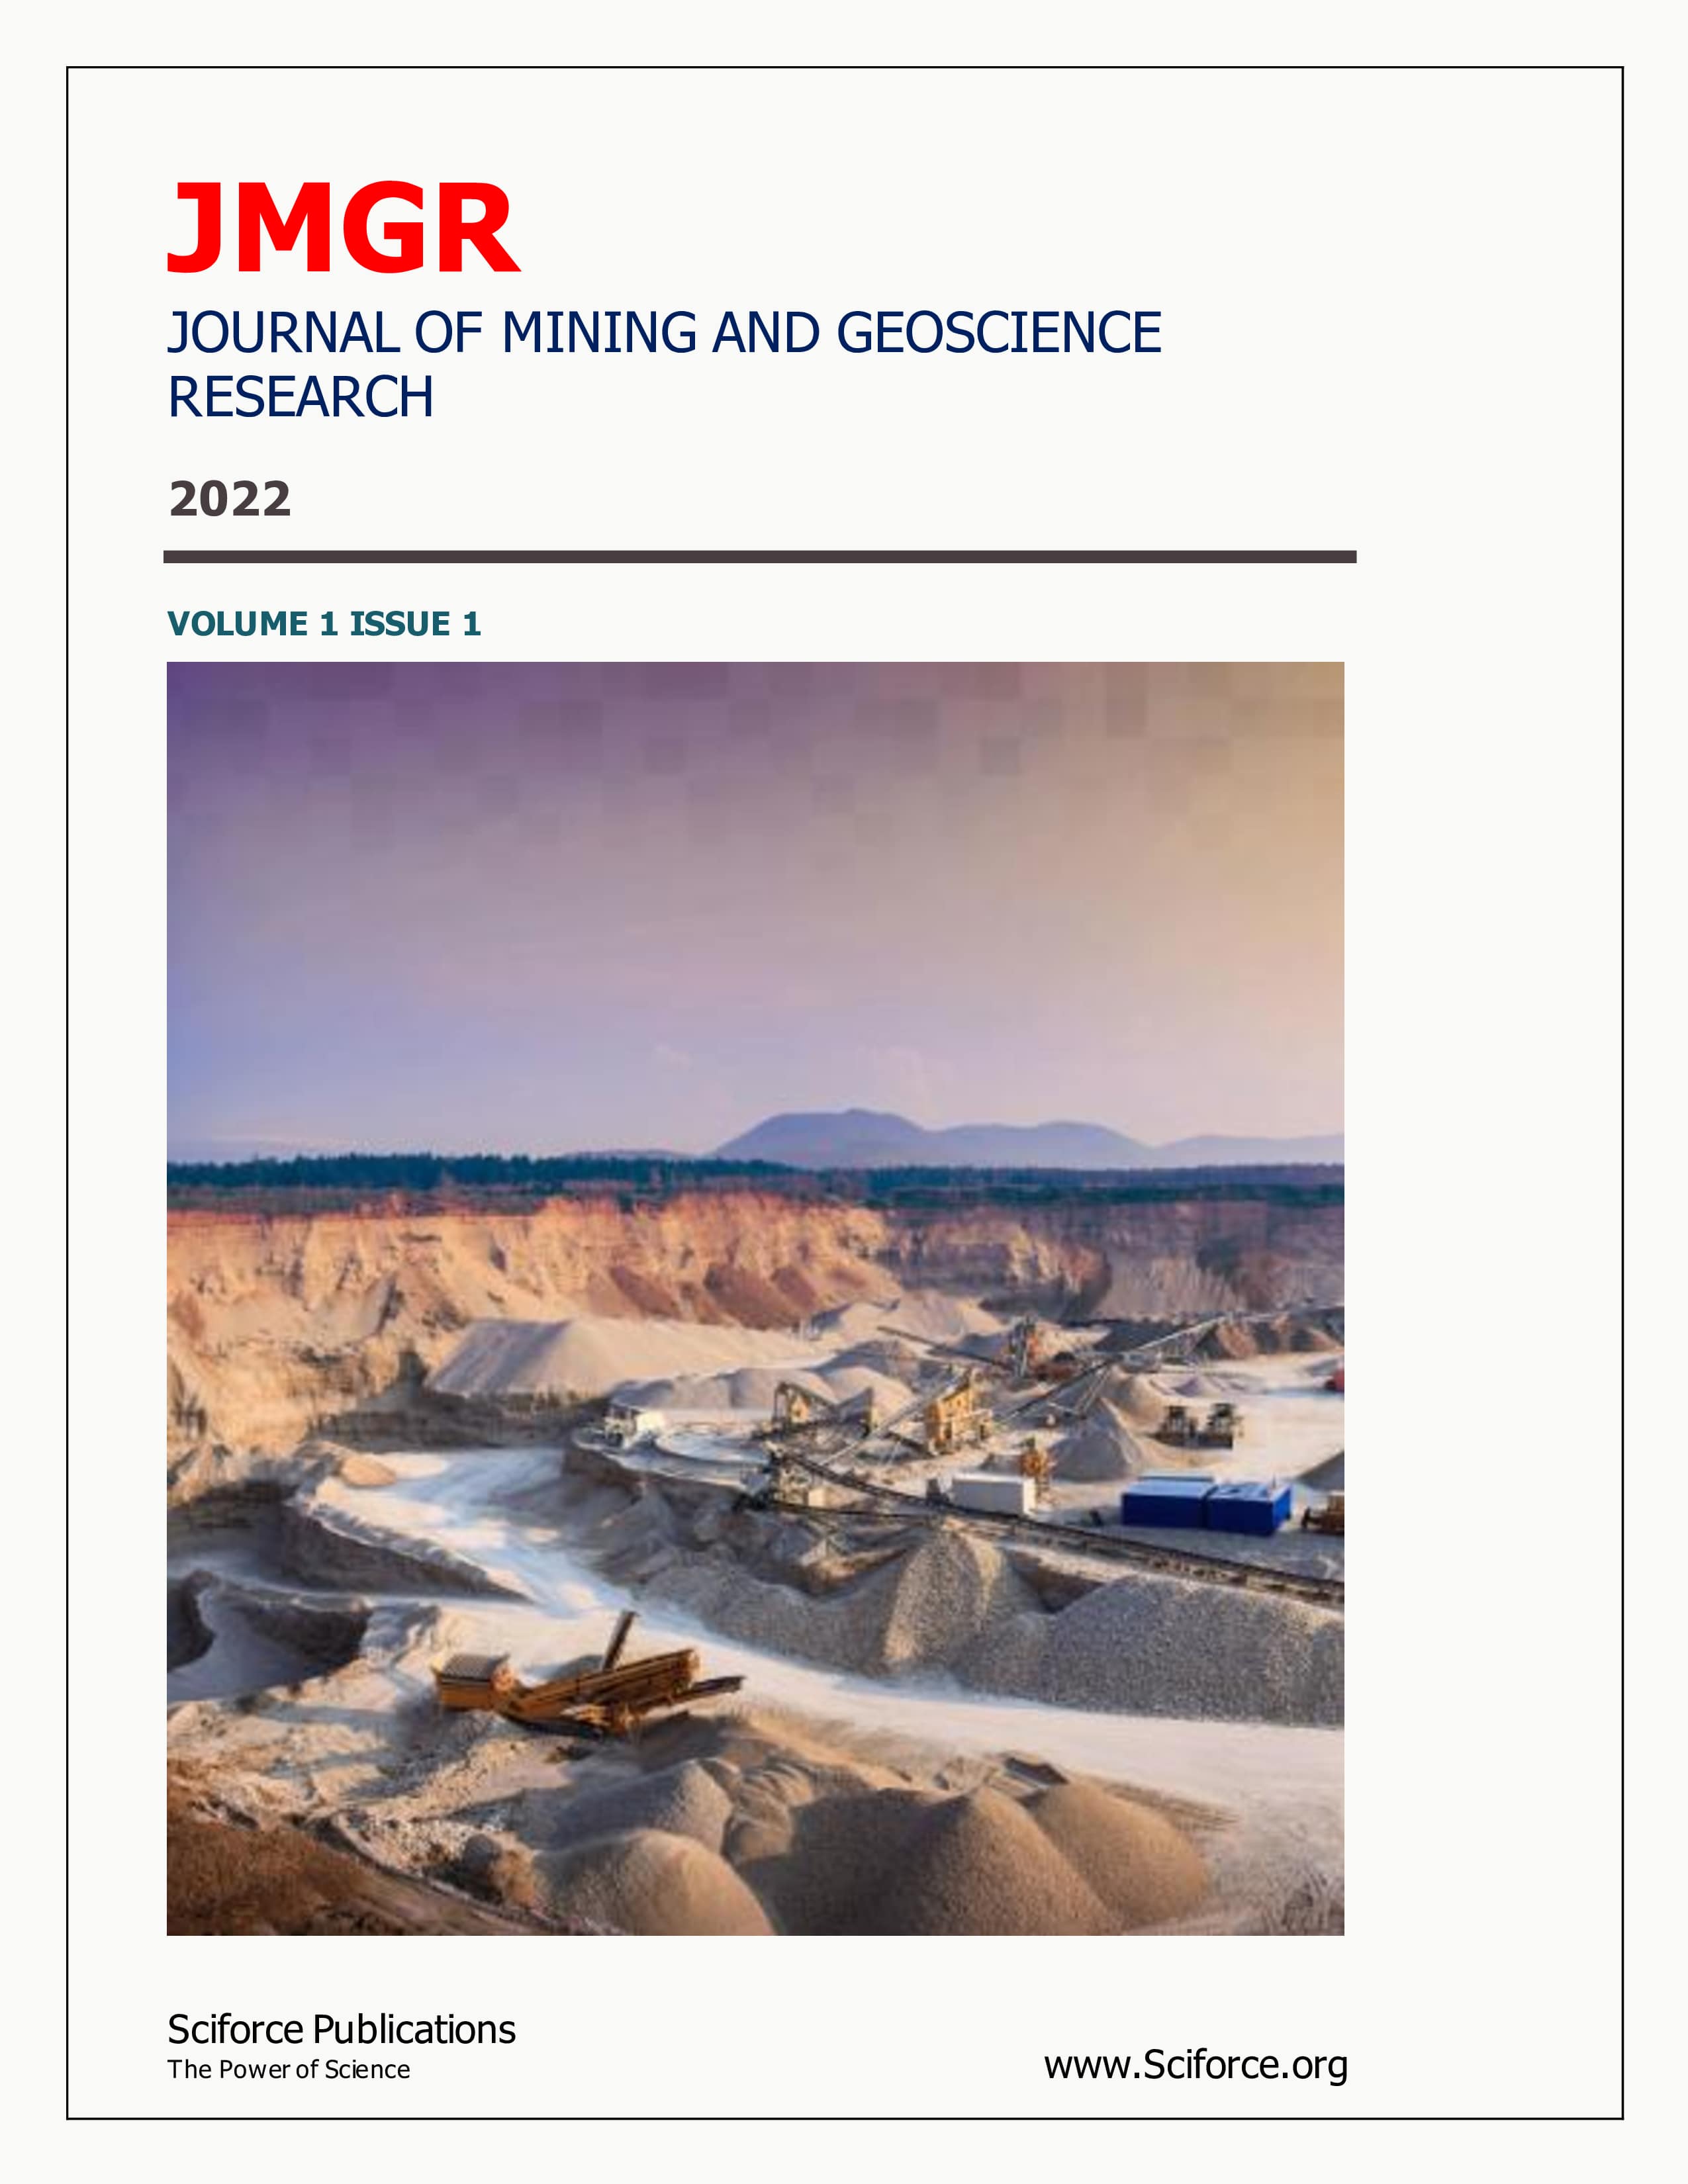 Journal of Mining and Geosciences Research